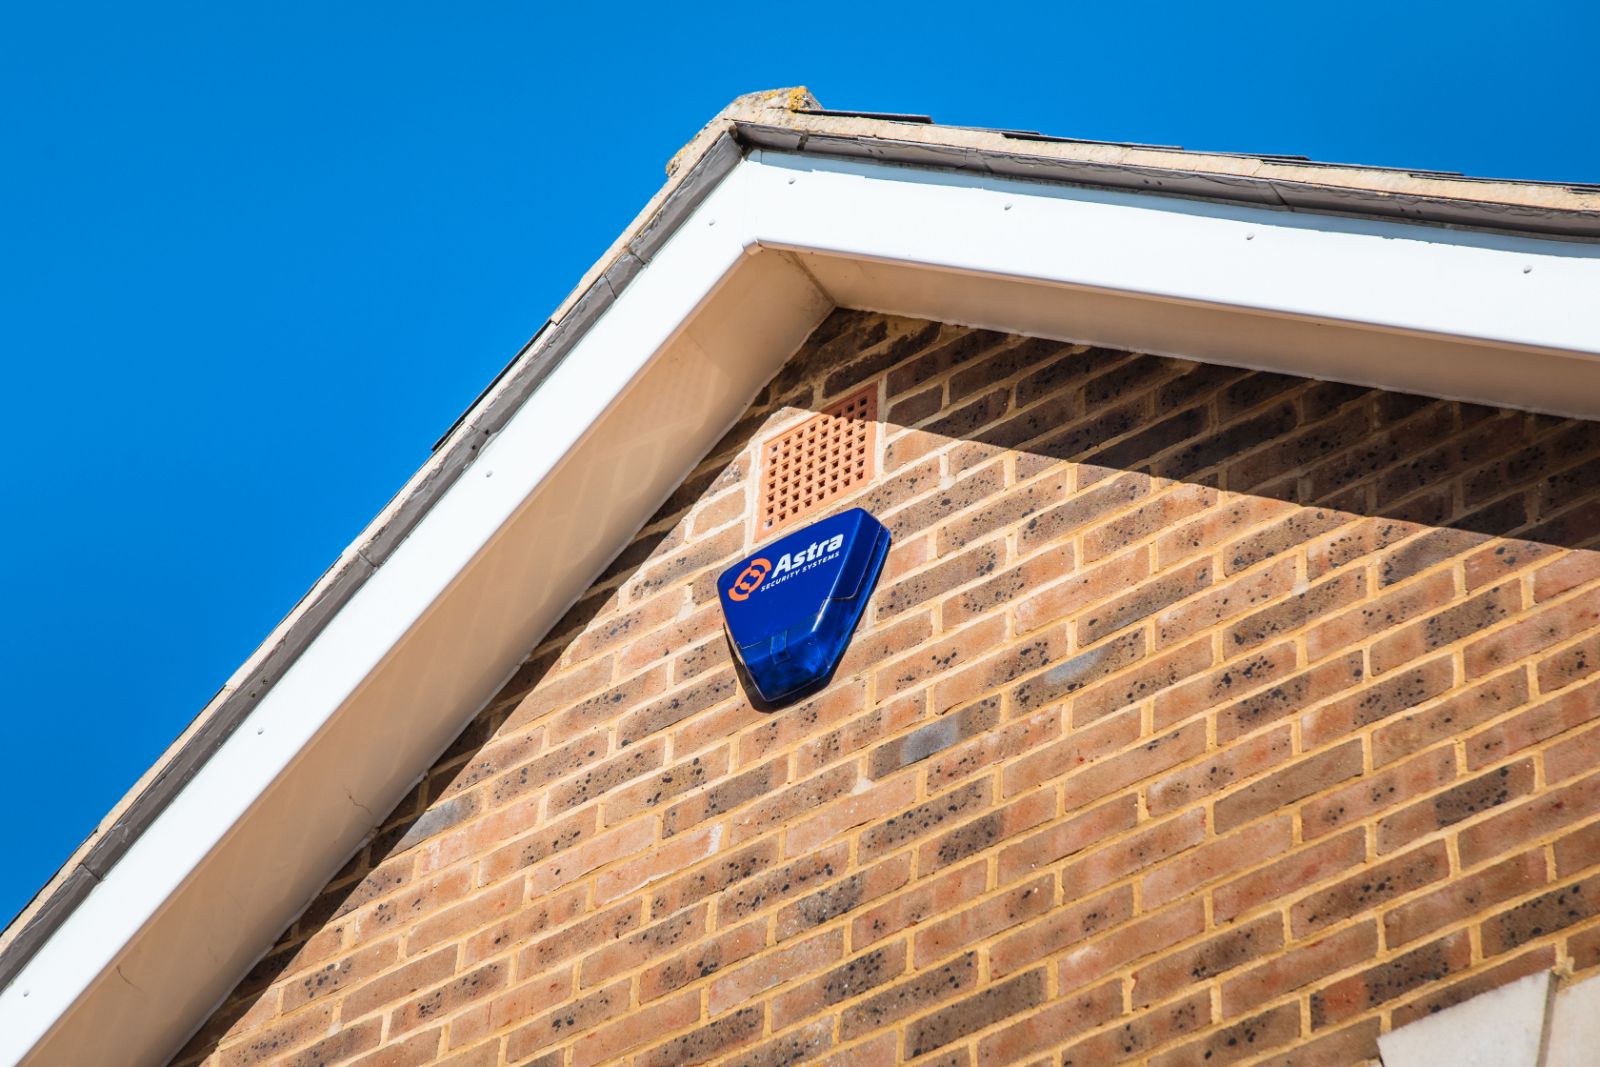 Burglar Alarm Systems Maidstone Medway And Tonbridge Astra Security Systems